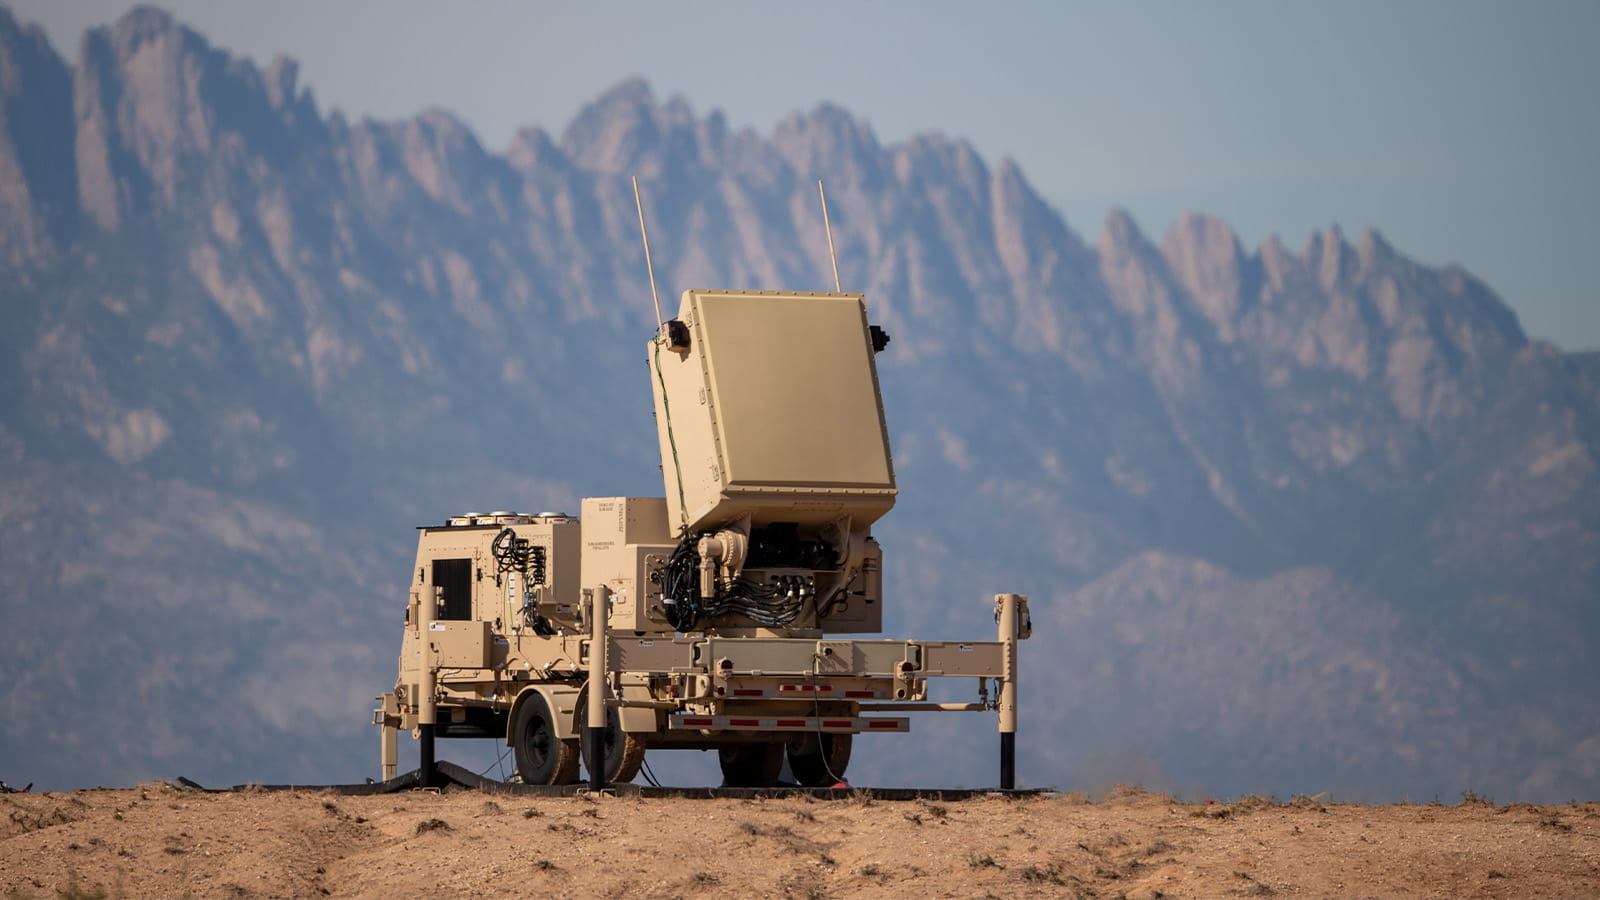 RTX Raytheon GhostEye pictured here during an extended exercise at White Sands Missile Range